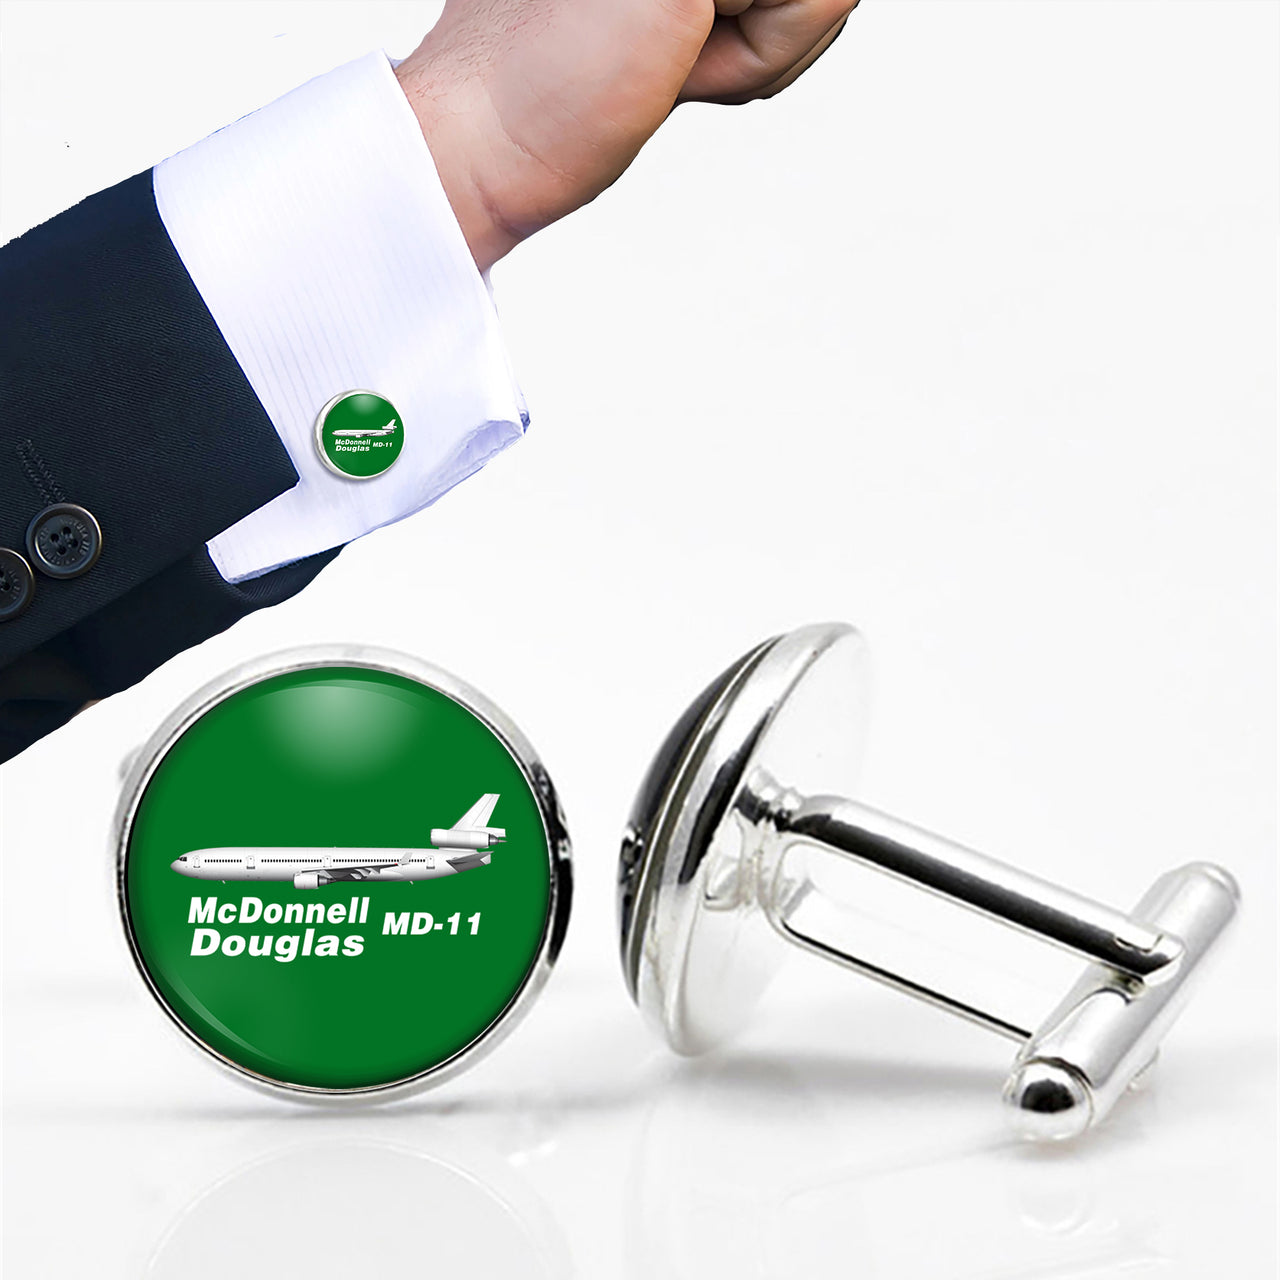 The McDonnell Douglas MD-11 Designed Cuff Links